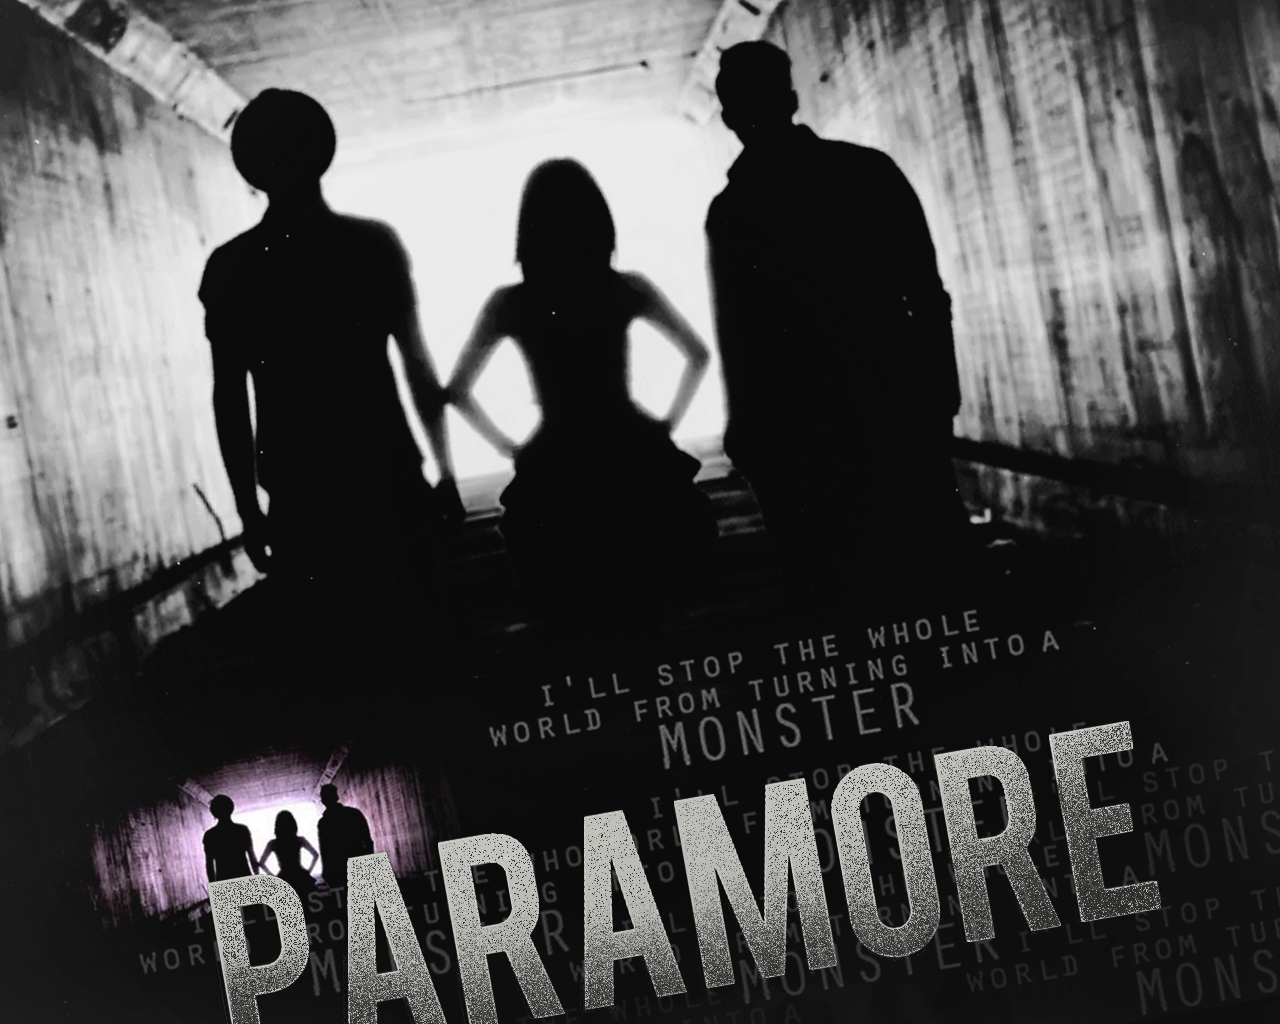 Paramore Wallpaper On